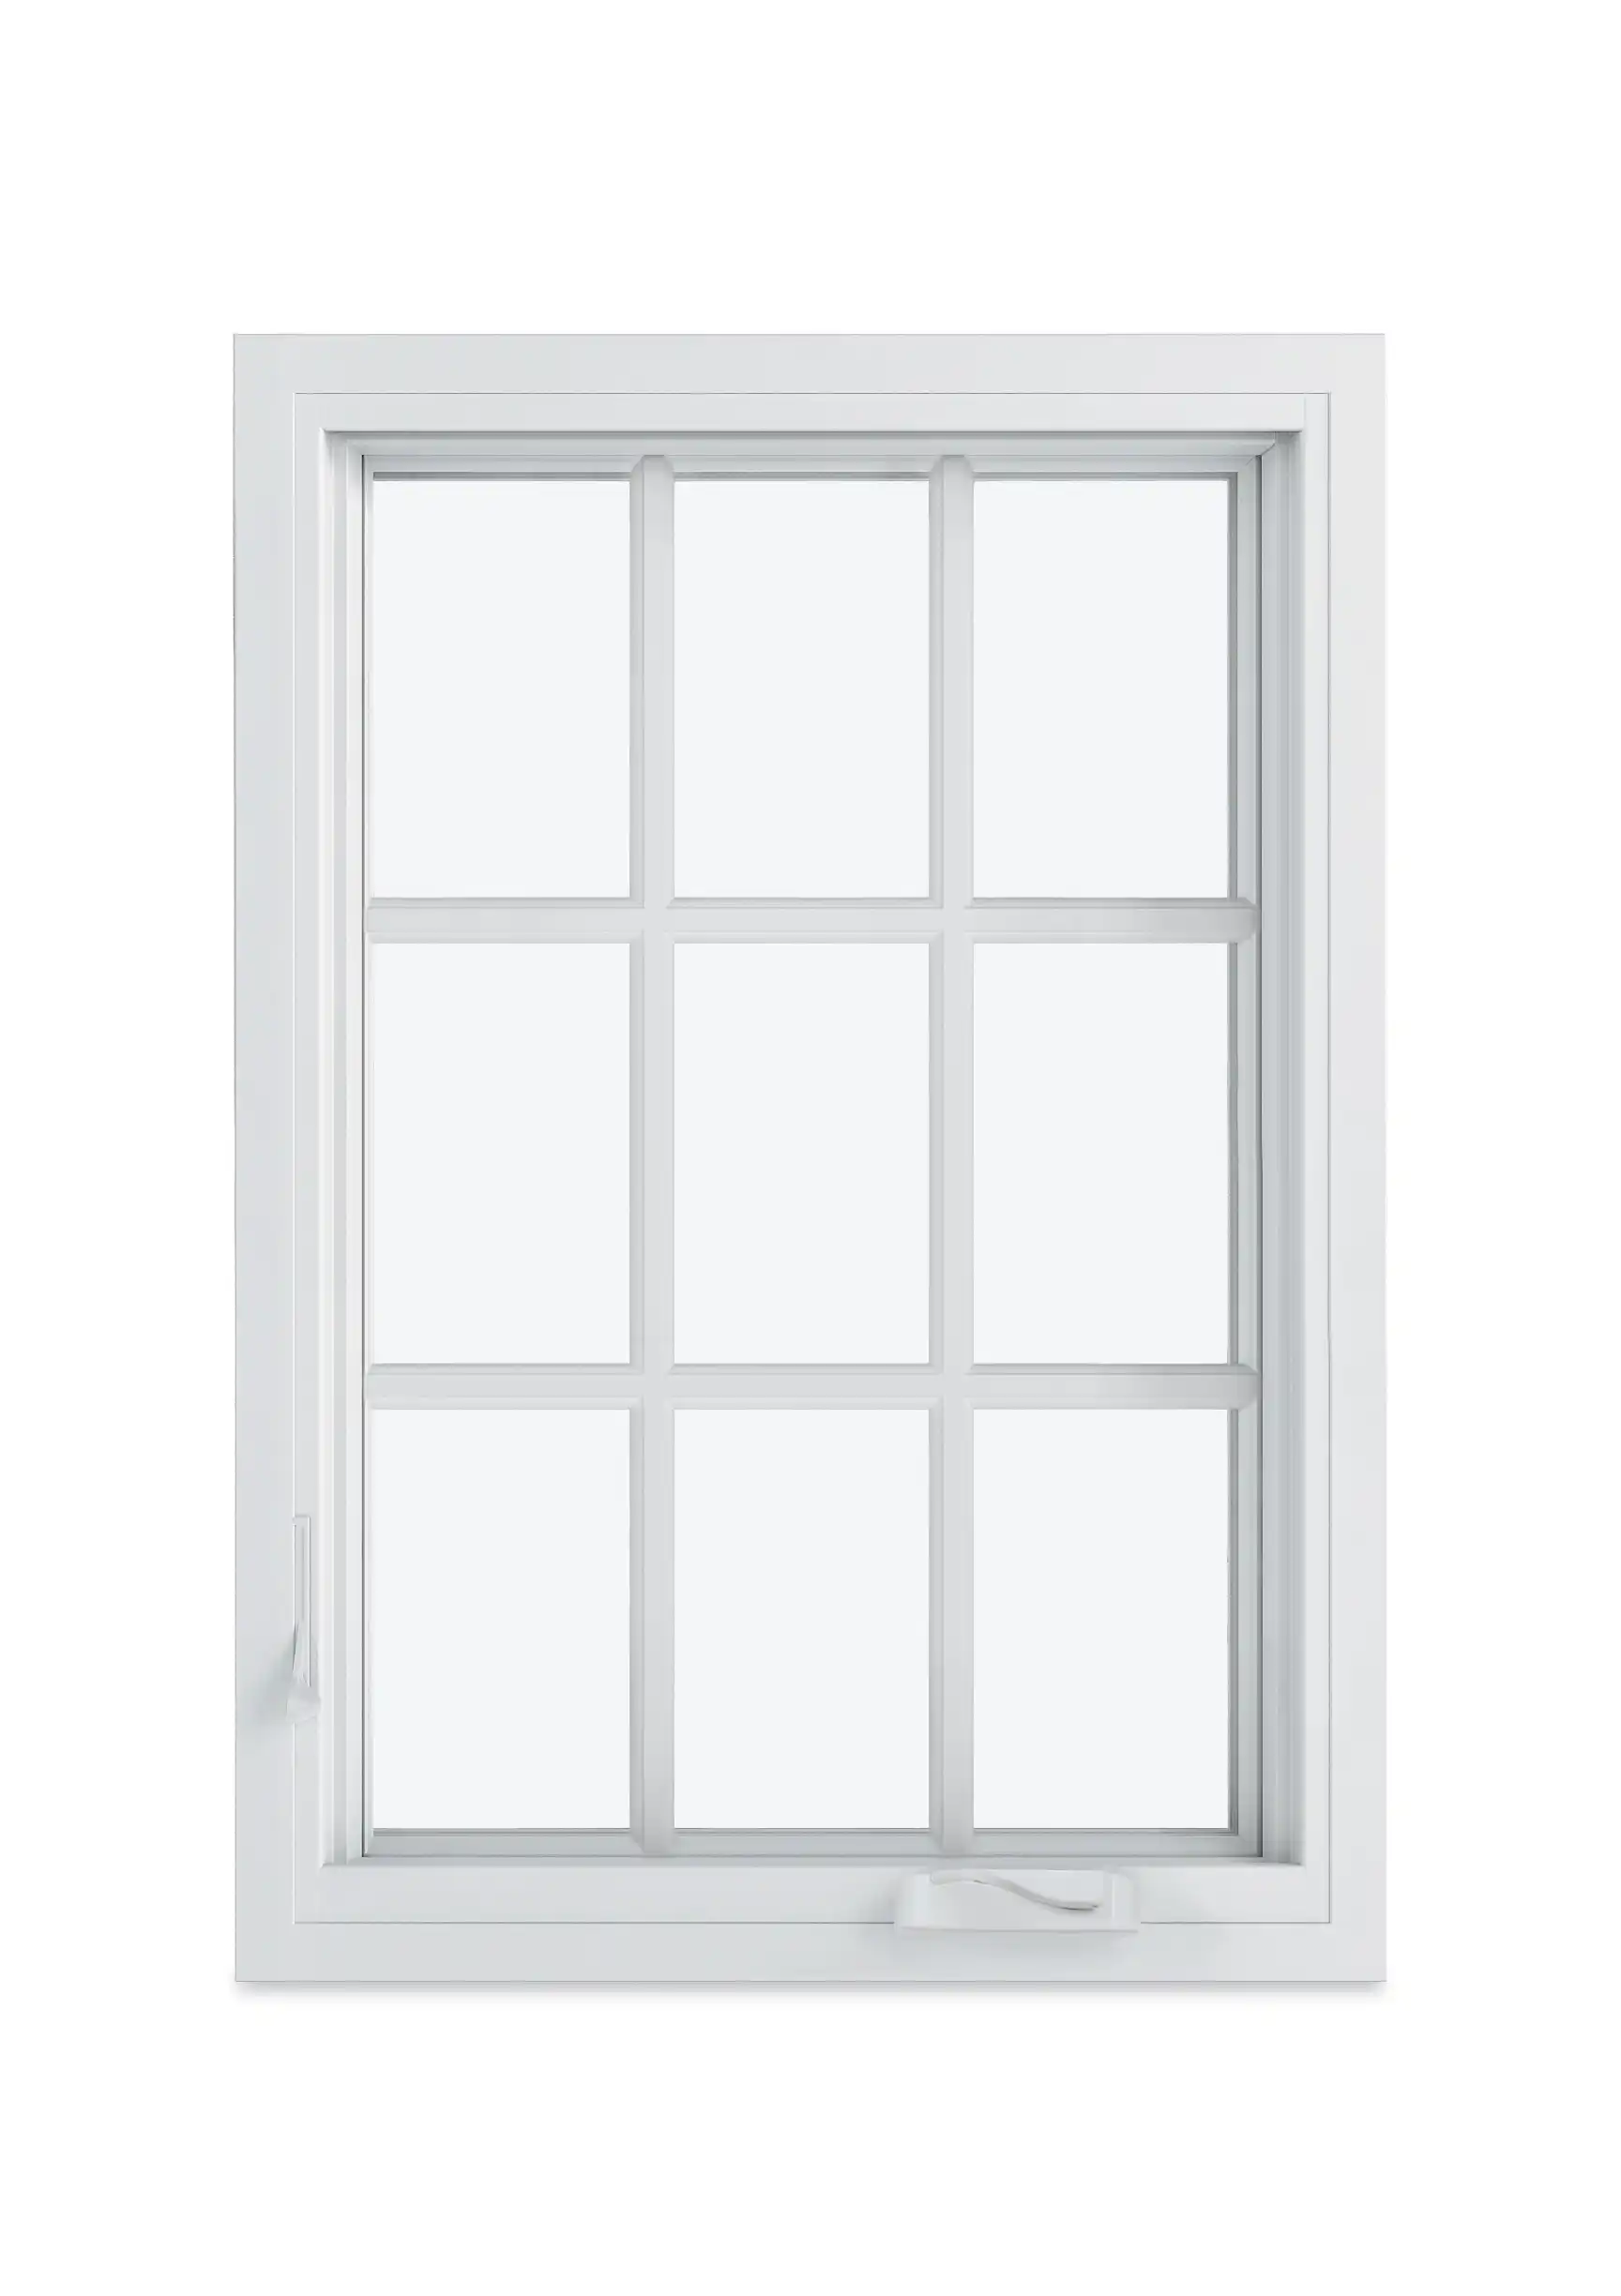 Image of a Marvin Replacement Casement window with a standard pattern divided lite style.